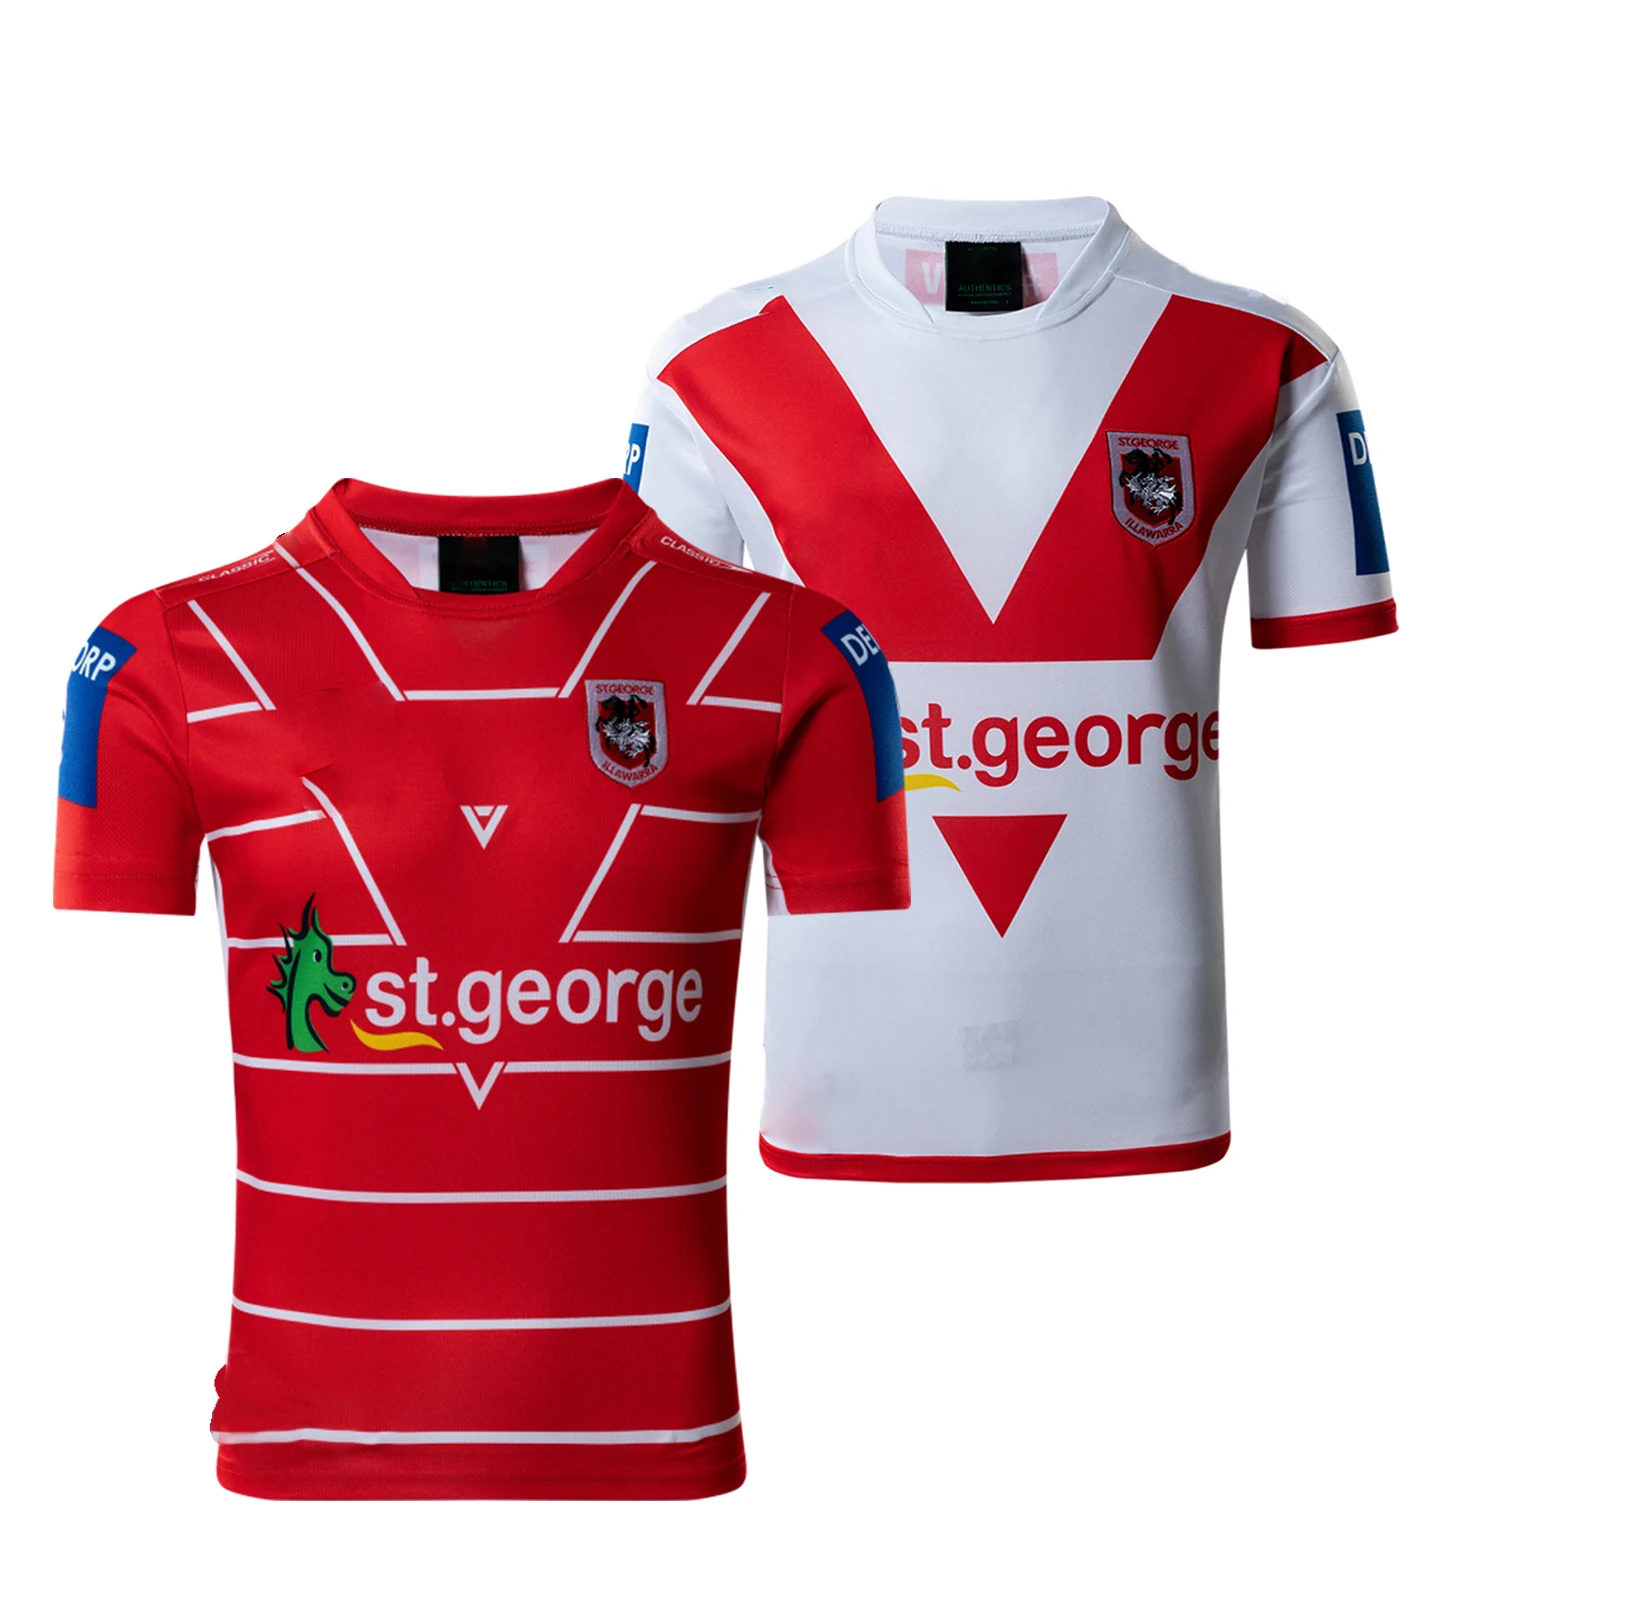 

ST.GEORGE DRAGON 2021 Men's Home/Away Rugby Jersey Sport Shirt S-5XL